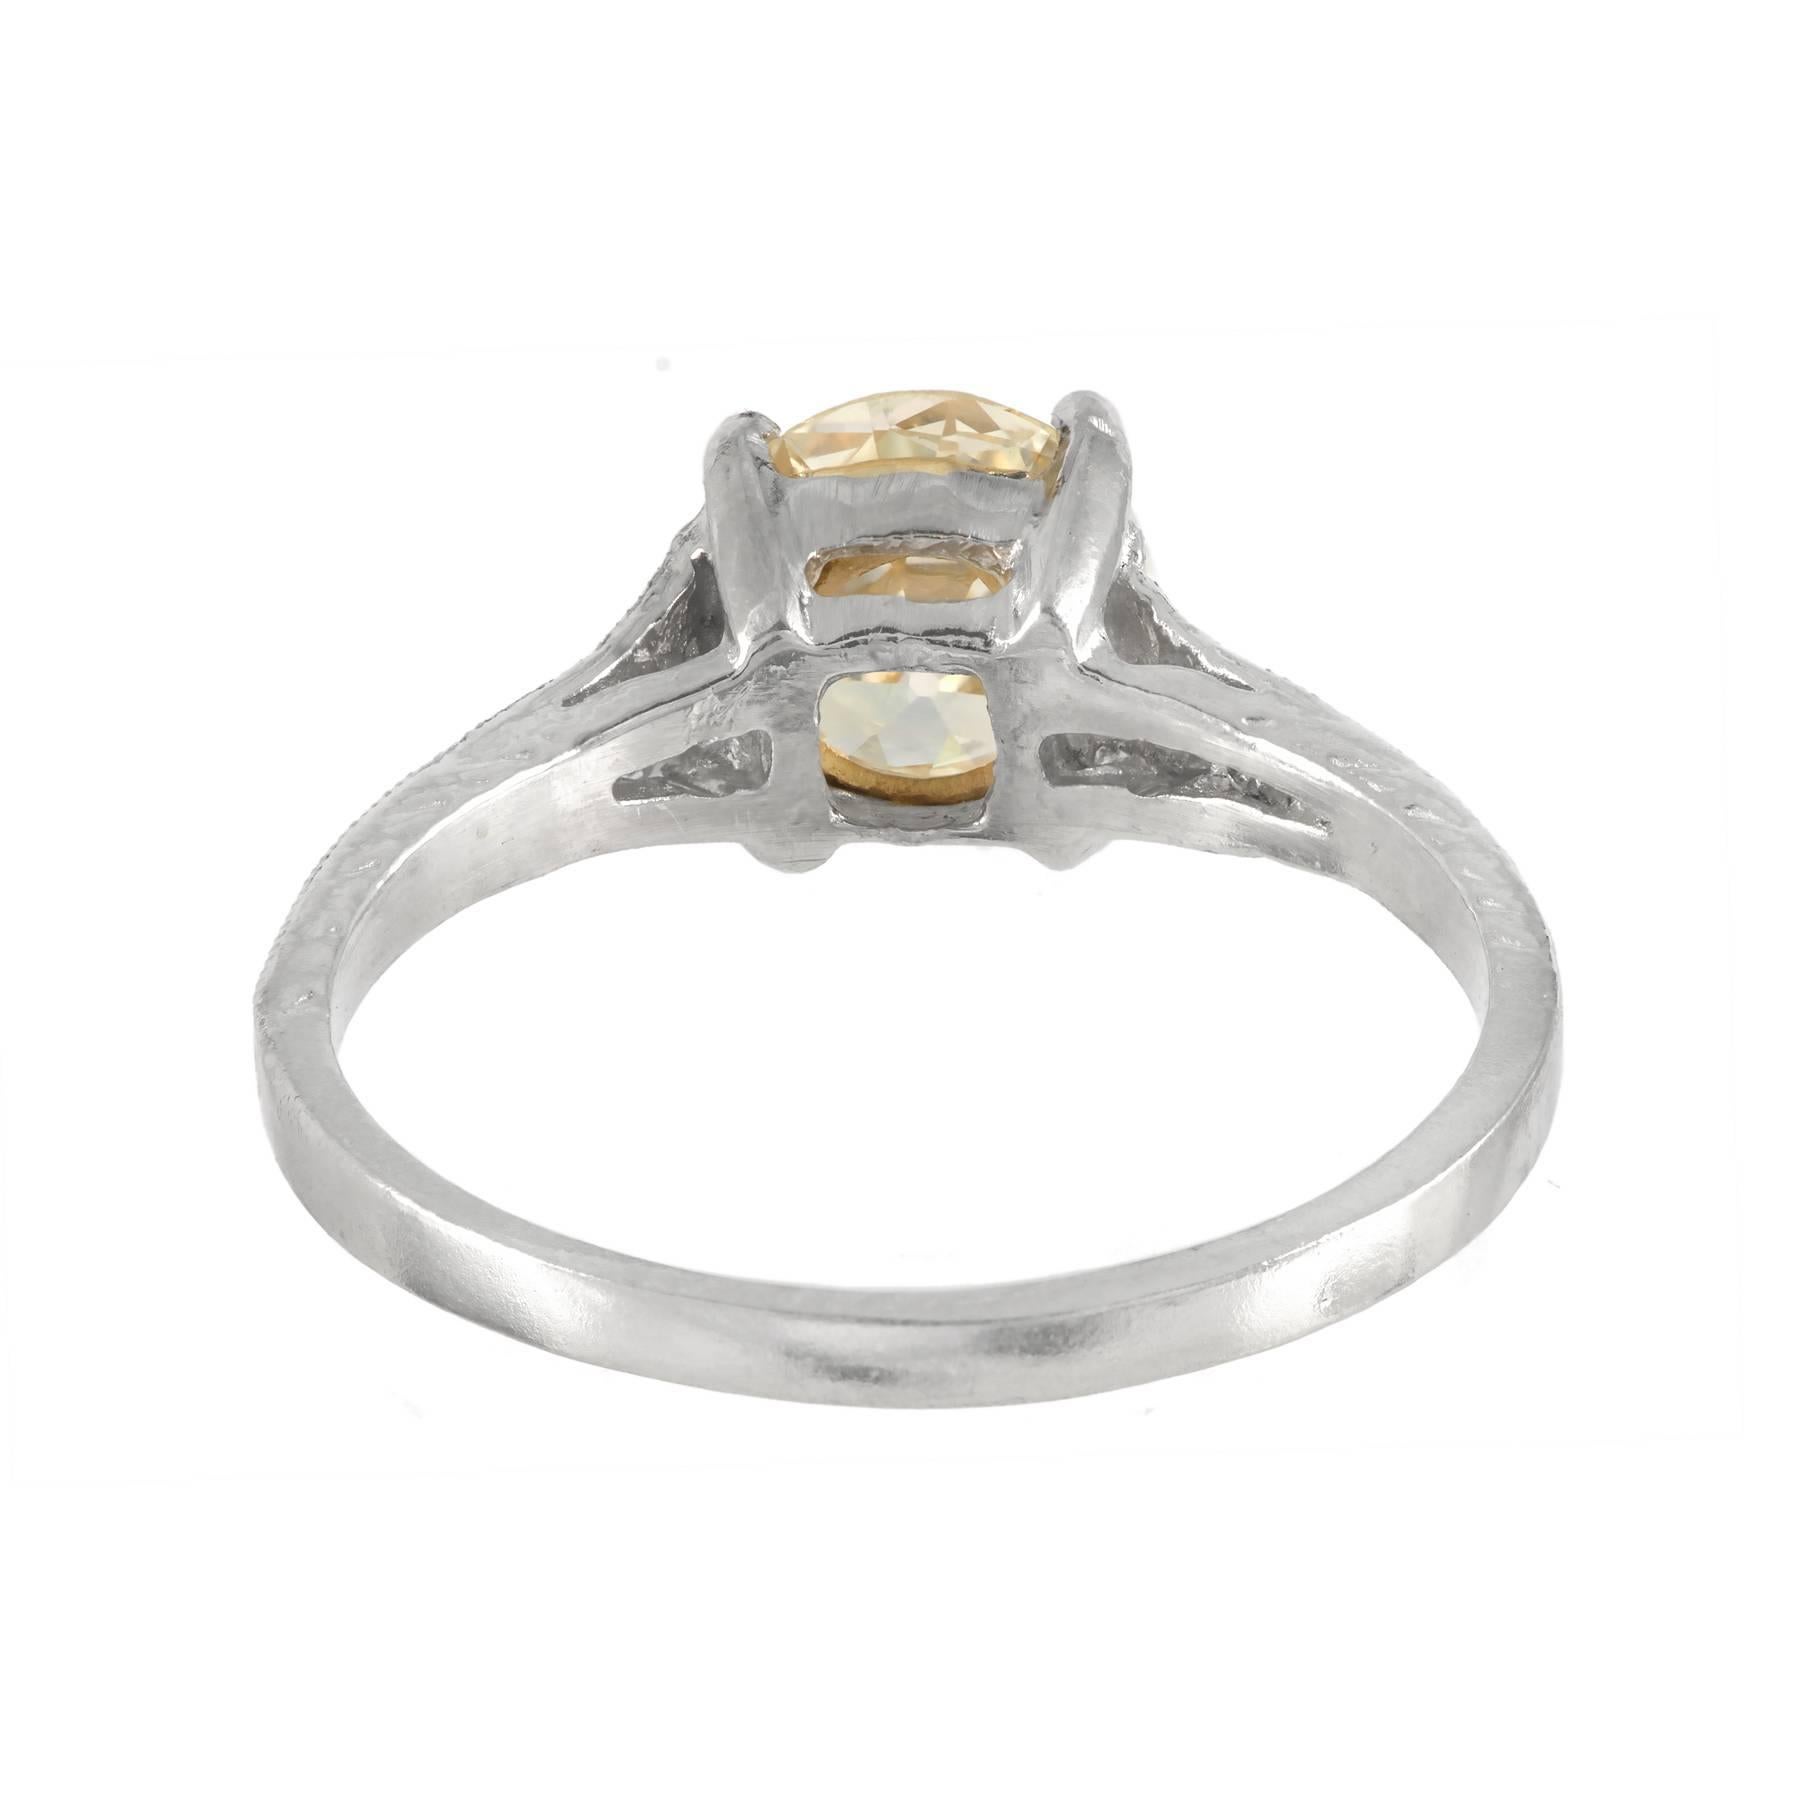 Very light yellow GIA certified diamond engagement ring in its original Platinum setting with old European cut diamond, and side accent diamonds. Circa 1920 -1930.

1 old European cut very light yellow diamond, approx. total weight .92cts, N, VS1,